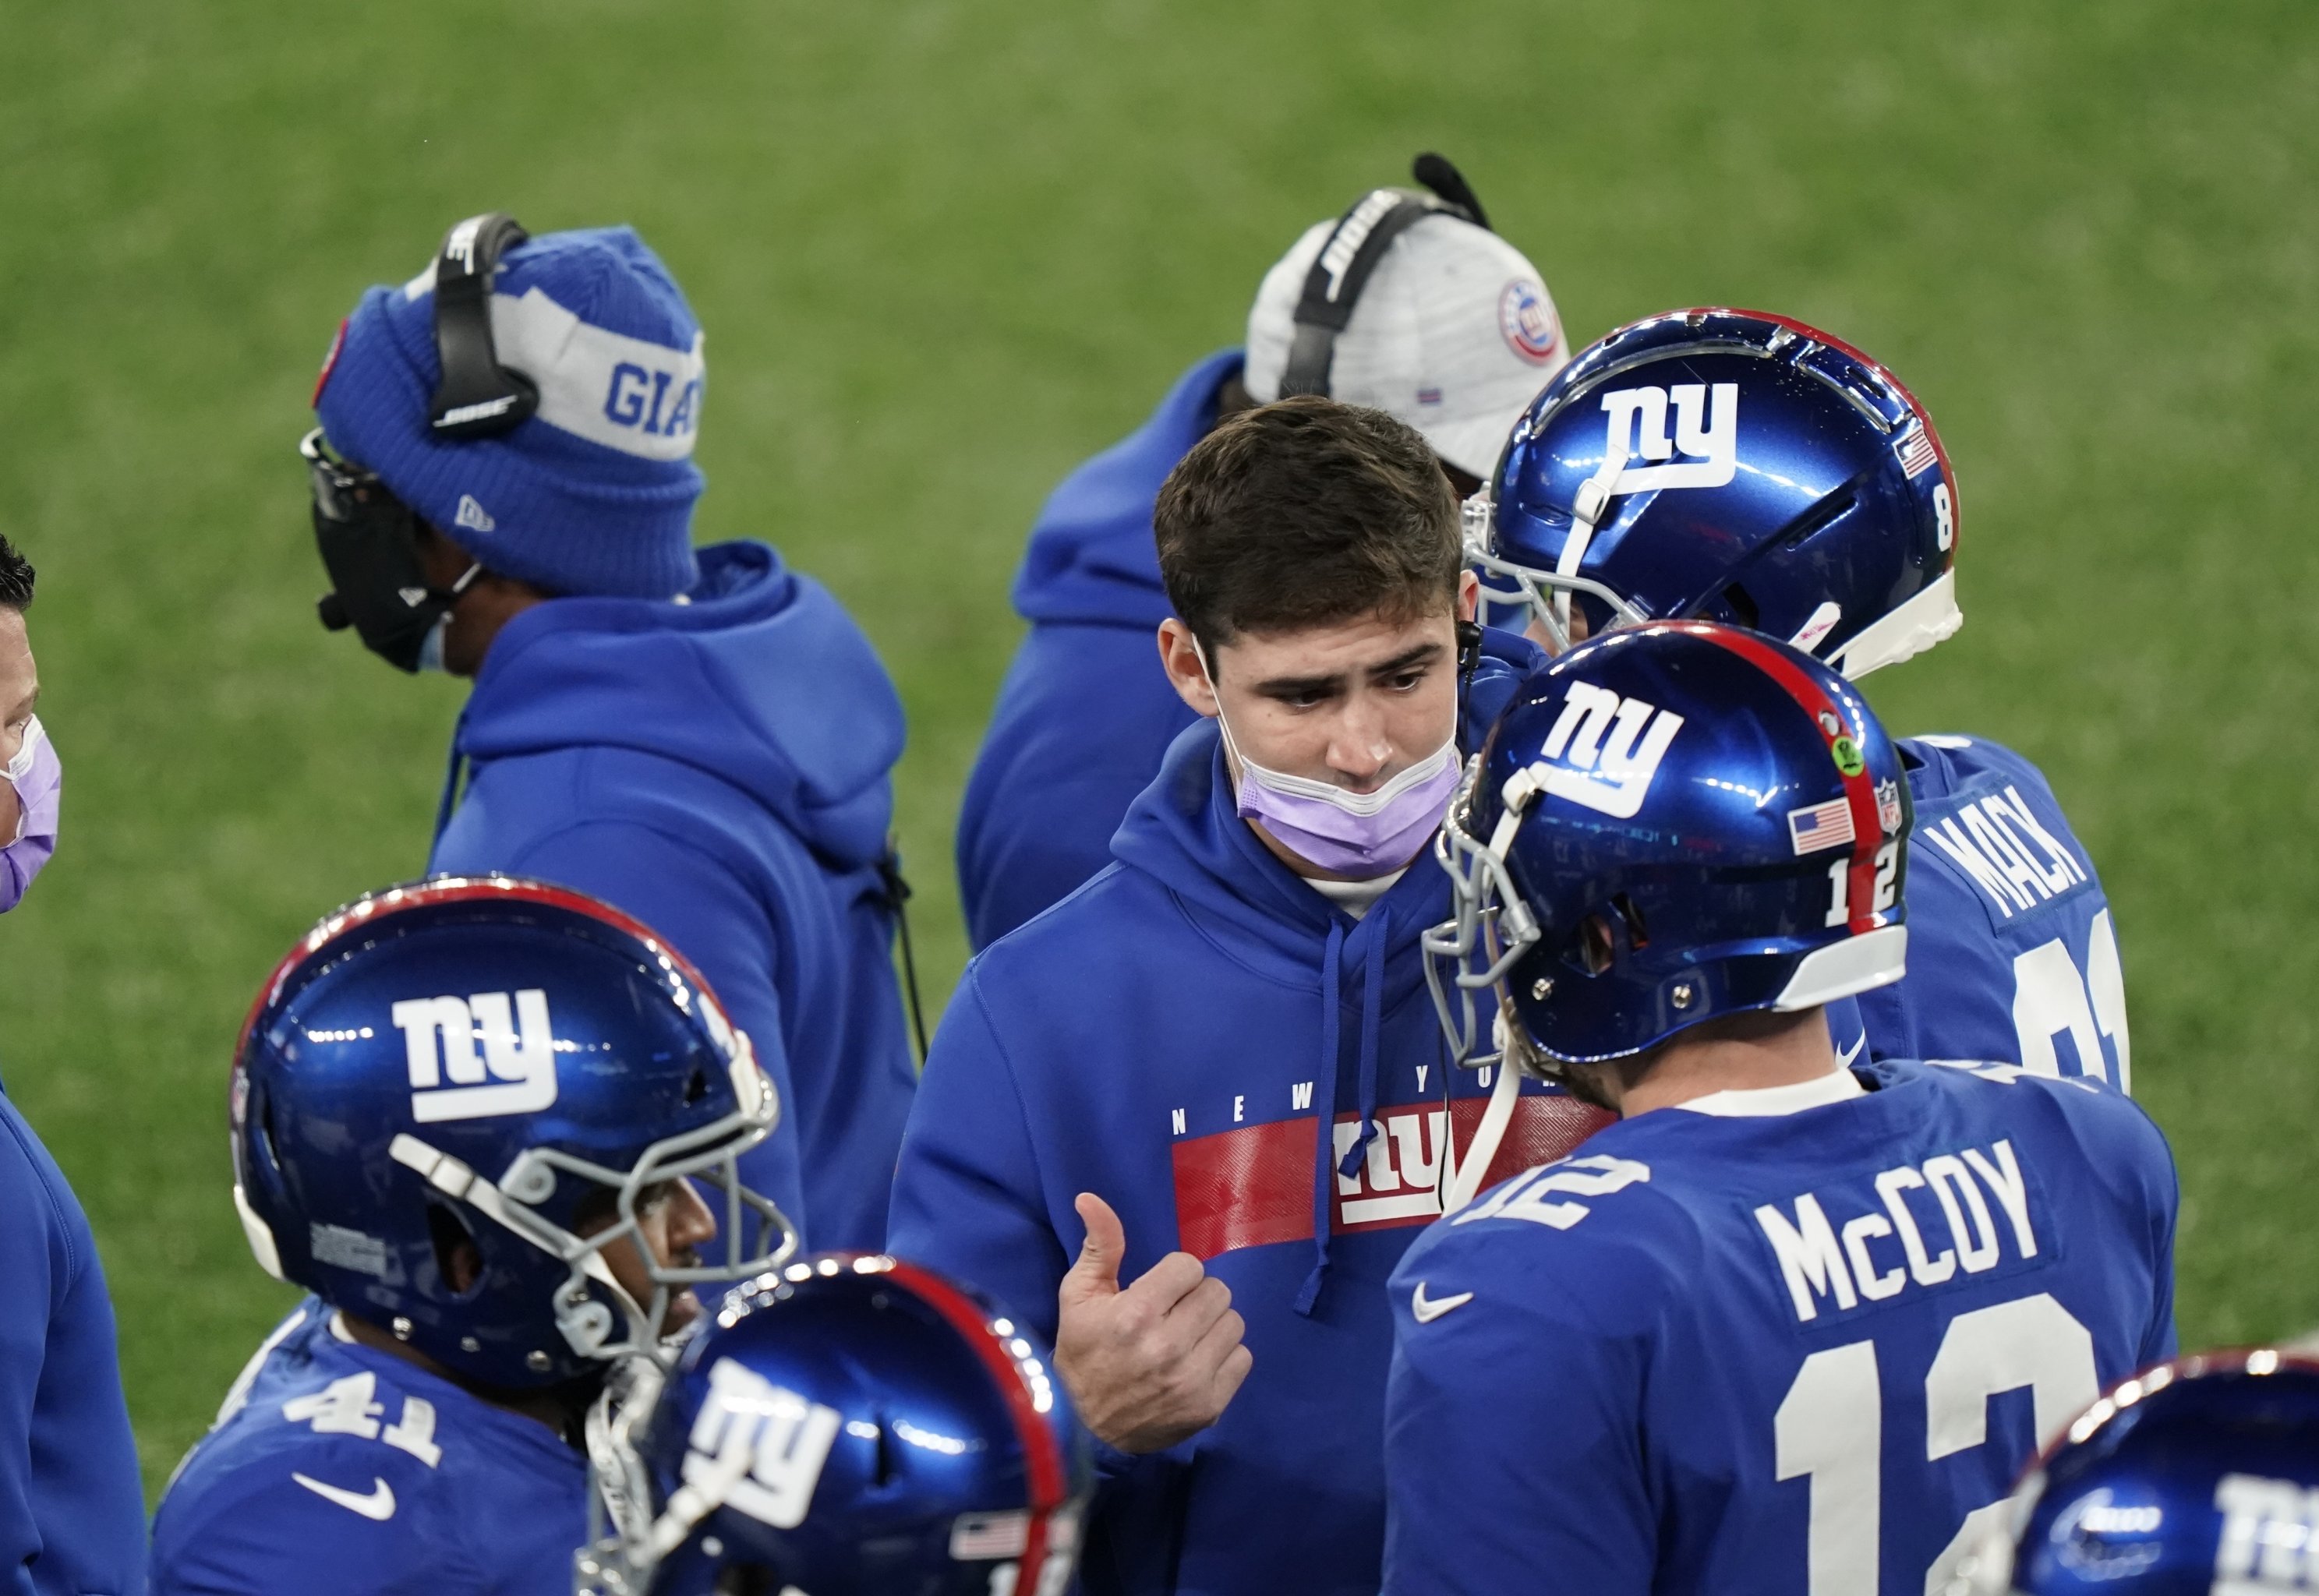 Giants vs. Jaguars final score: New York loses first game of 2018, 20-15 -  Bleeding Green Nation